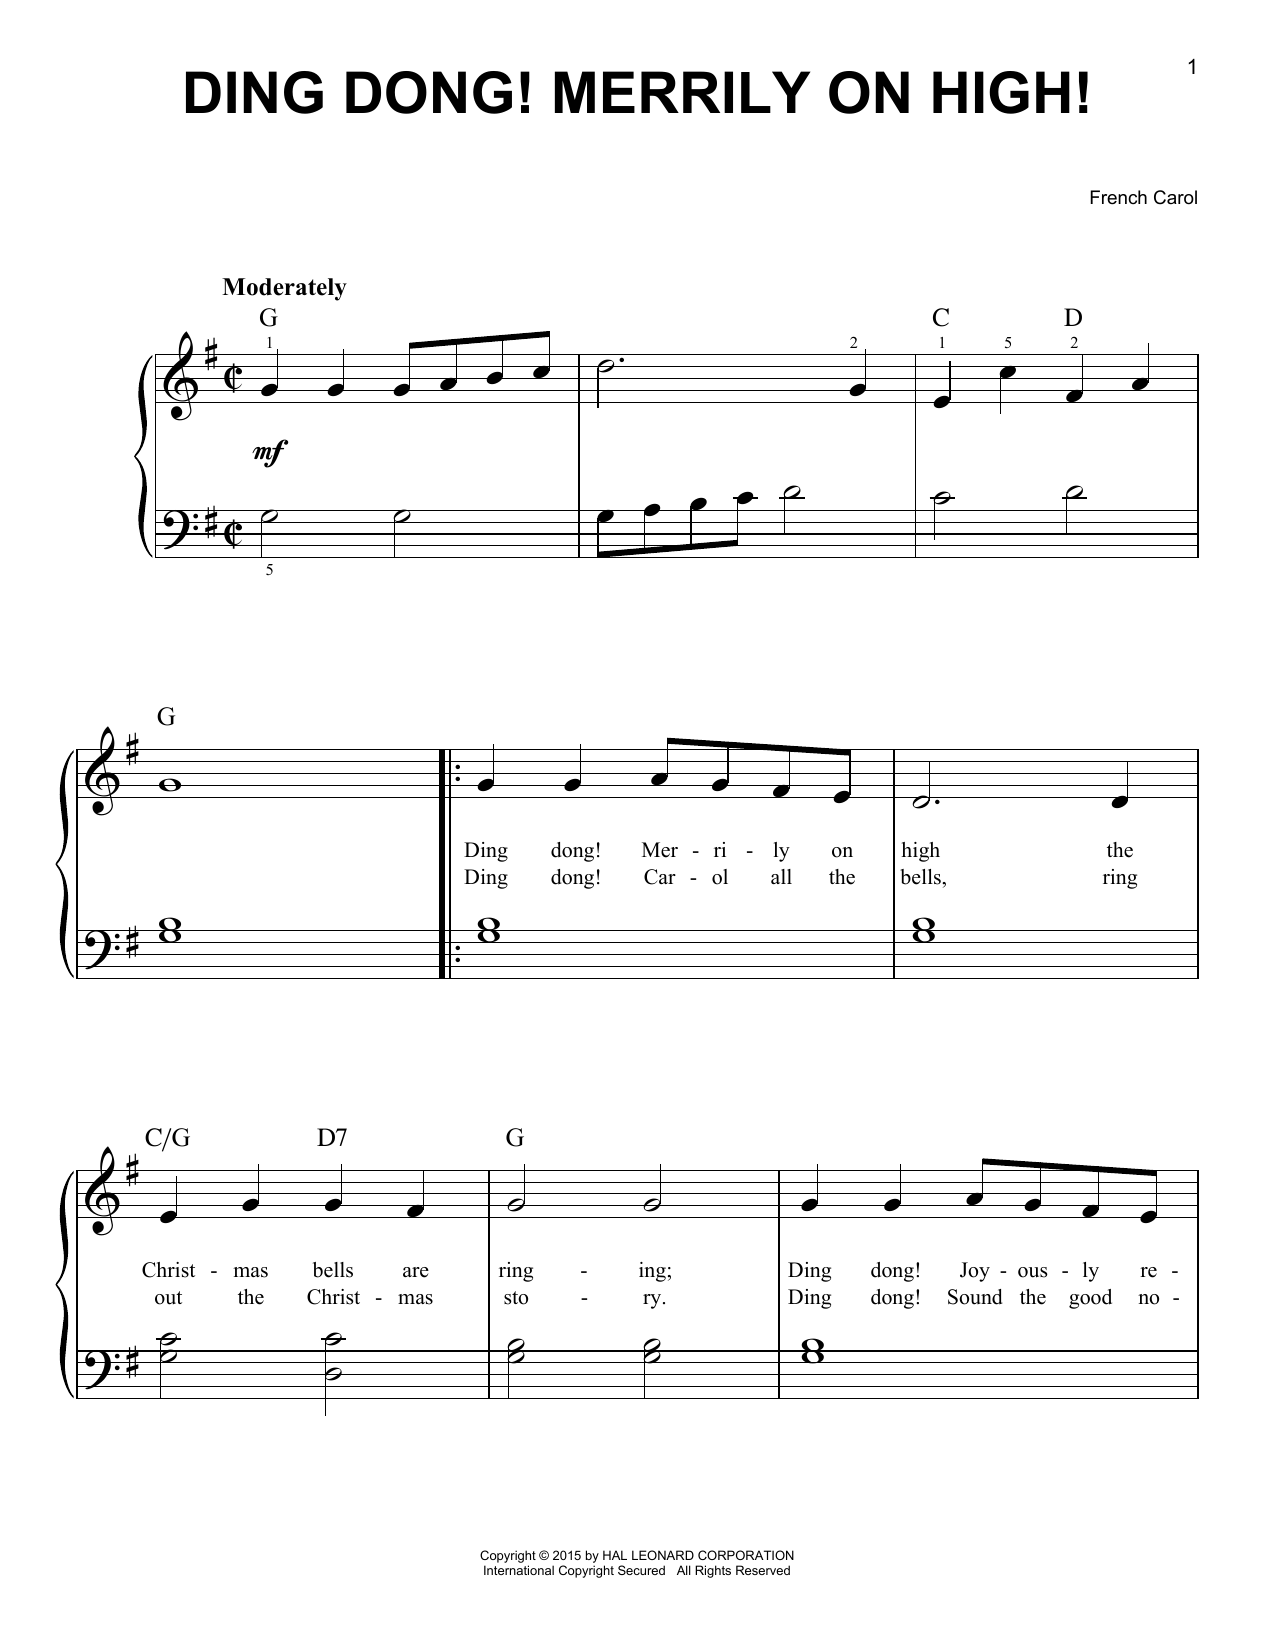 Download Christmas Carol Ding Dong! Merrily On High! Sheet Music